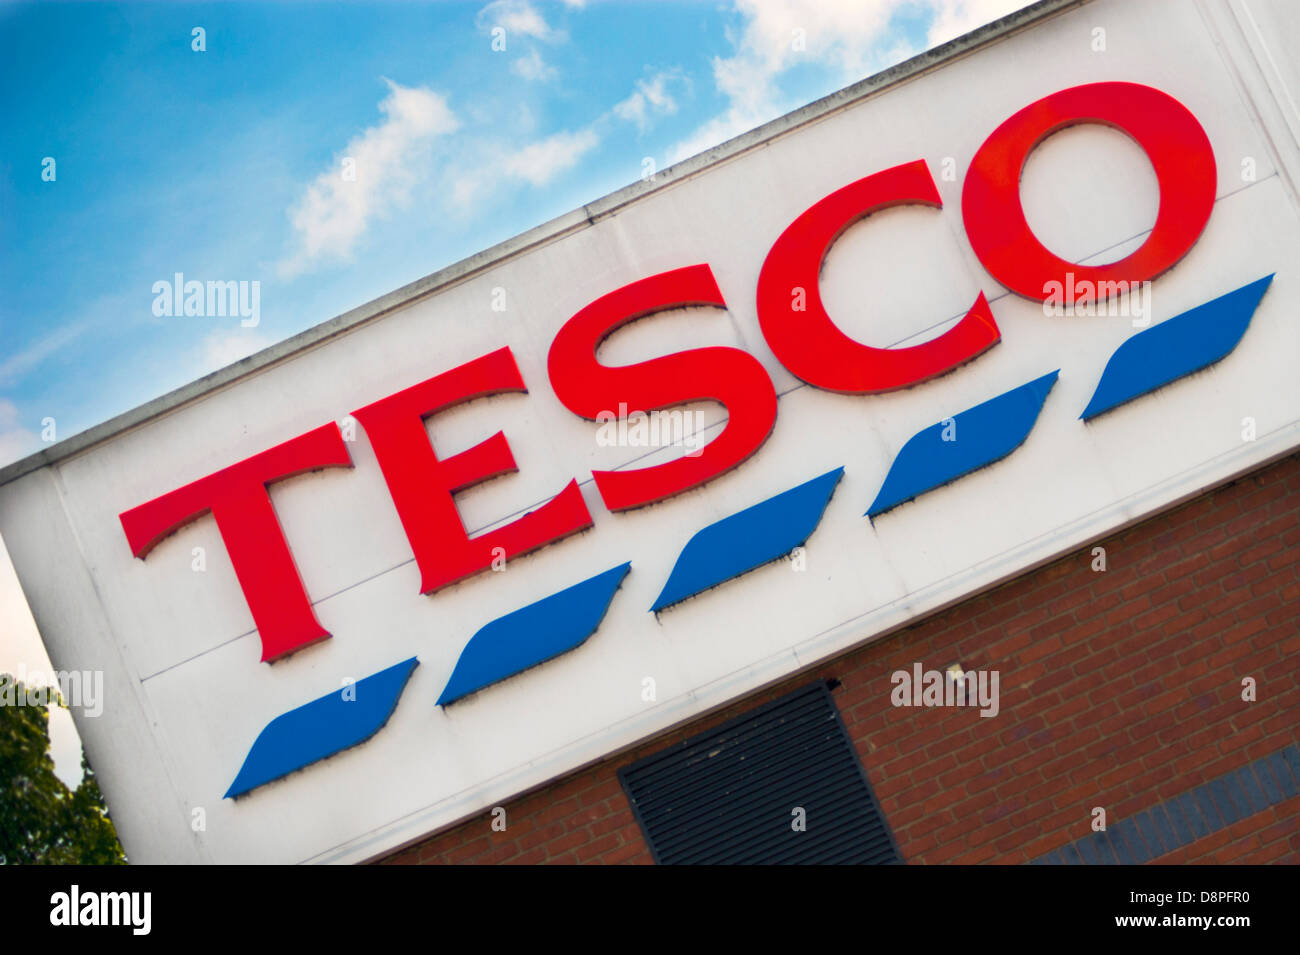 Tesco logo at rear of the Evesham superstore Stock Photo